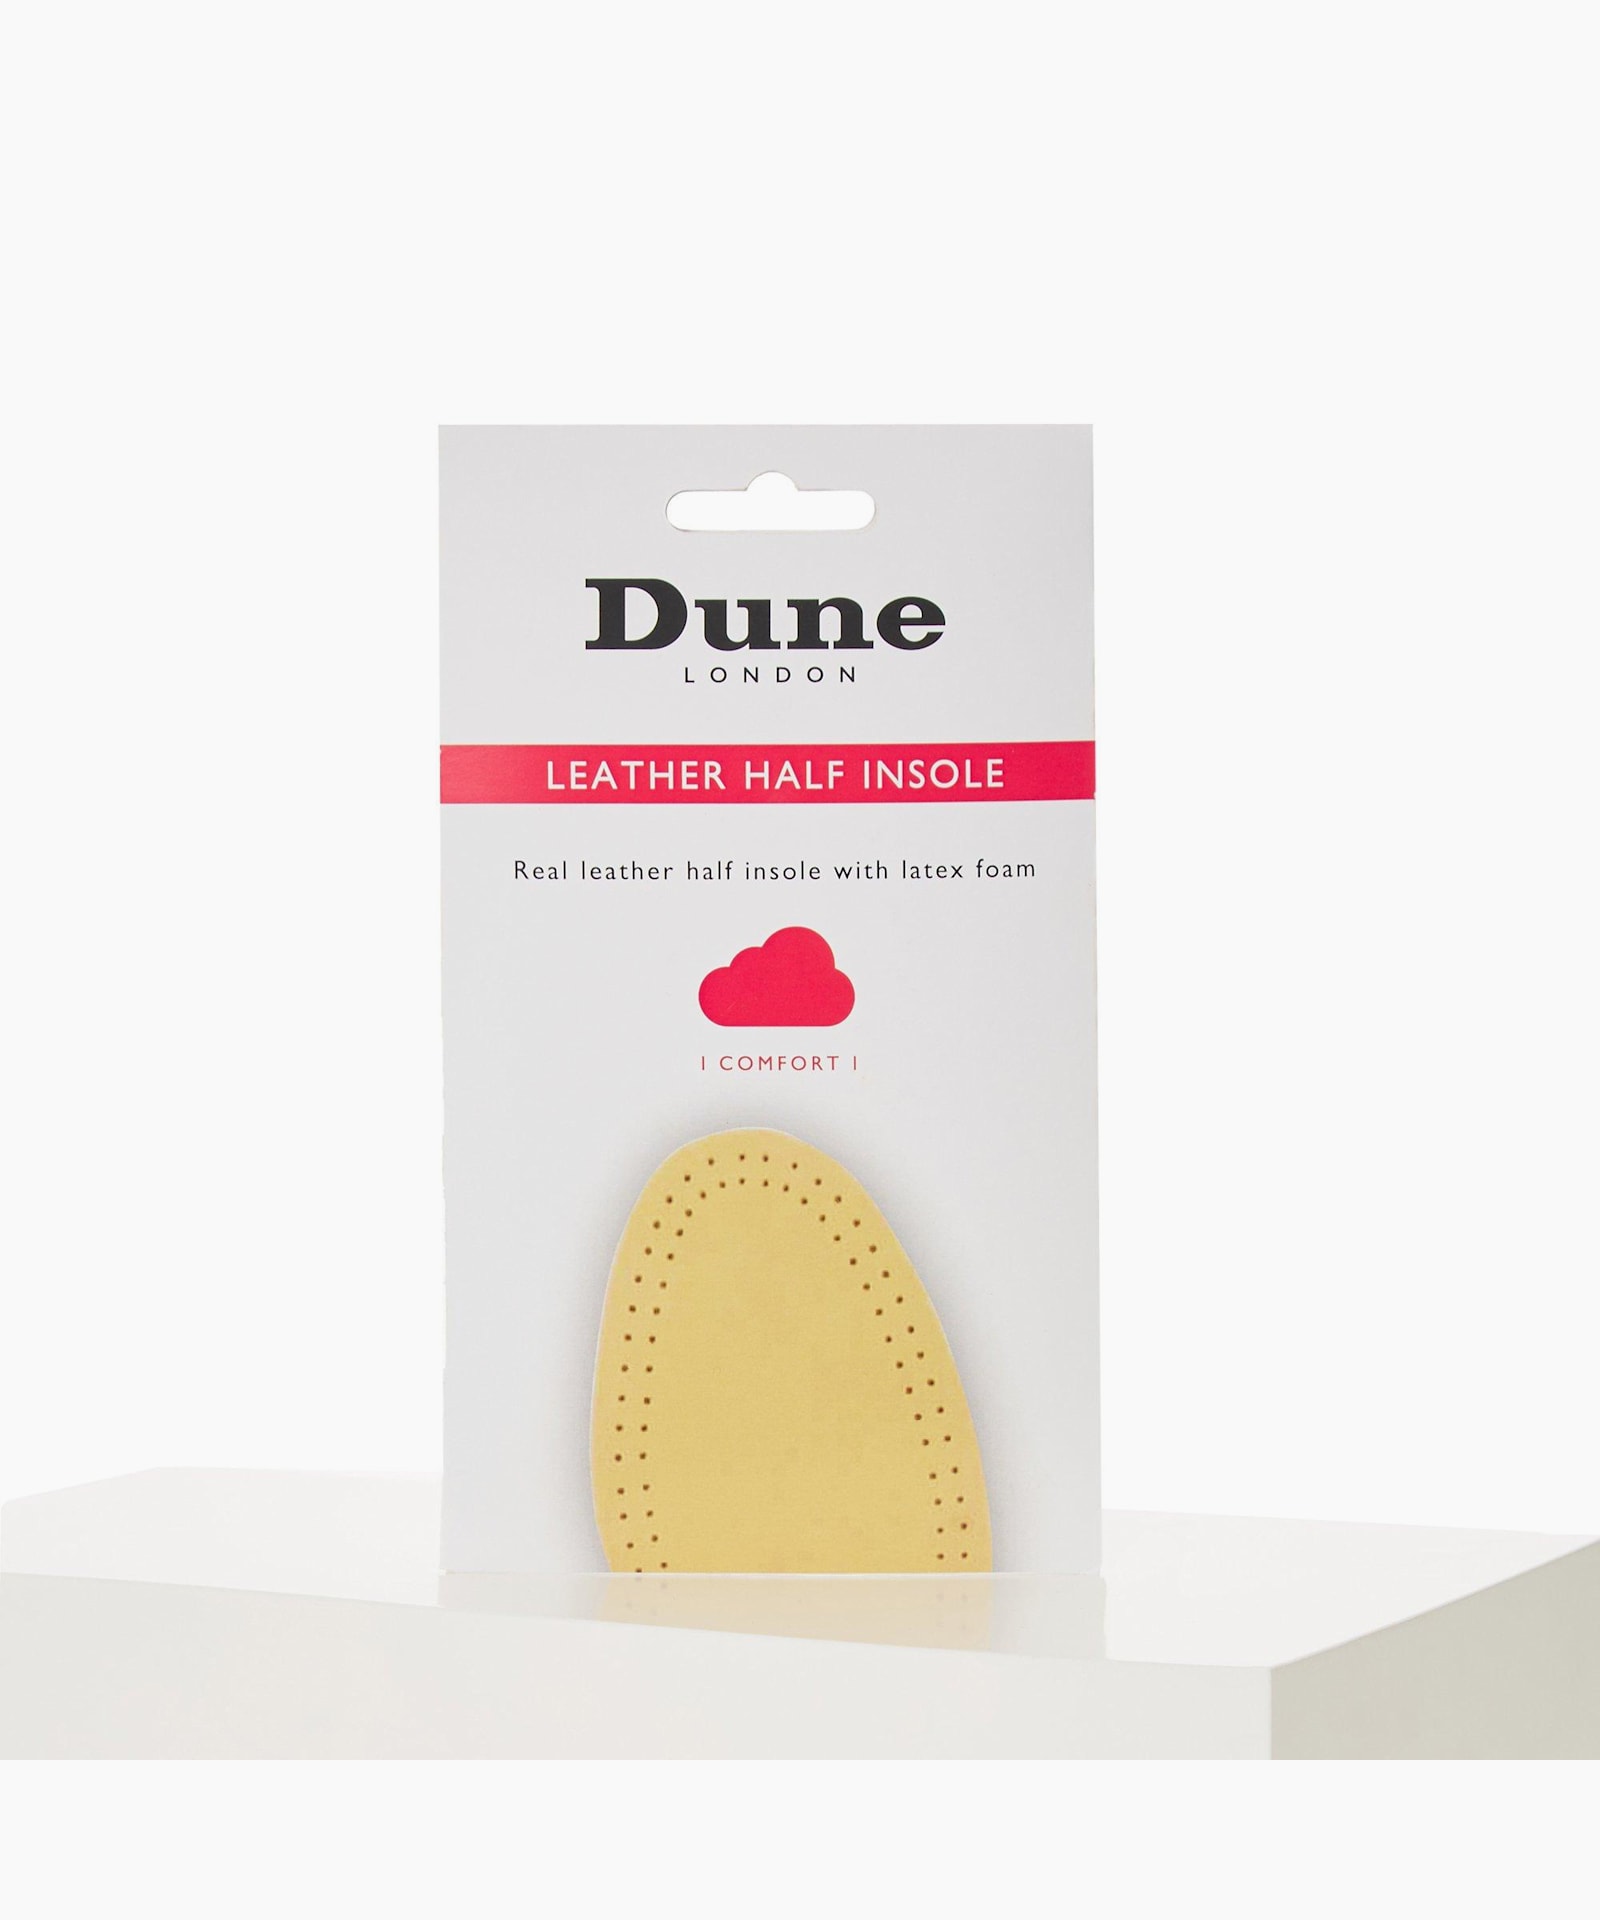 1/2 Leat Insole, None, large